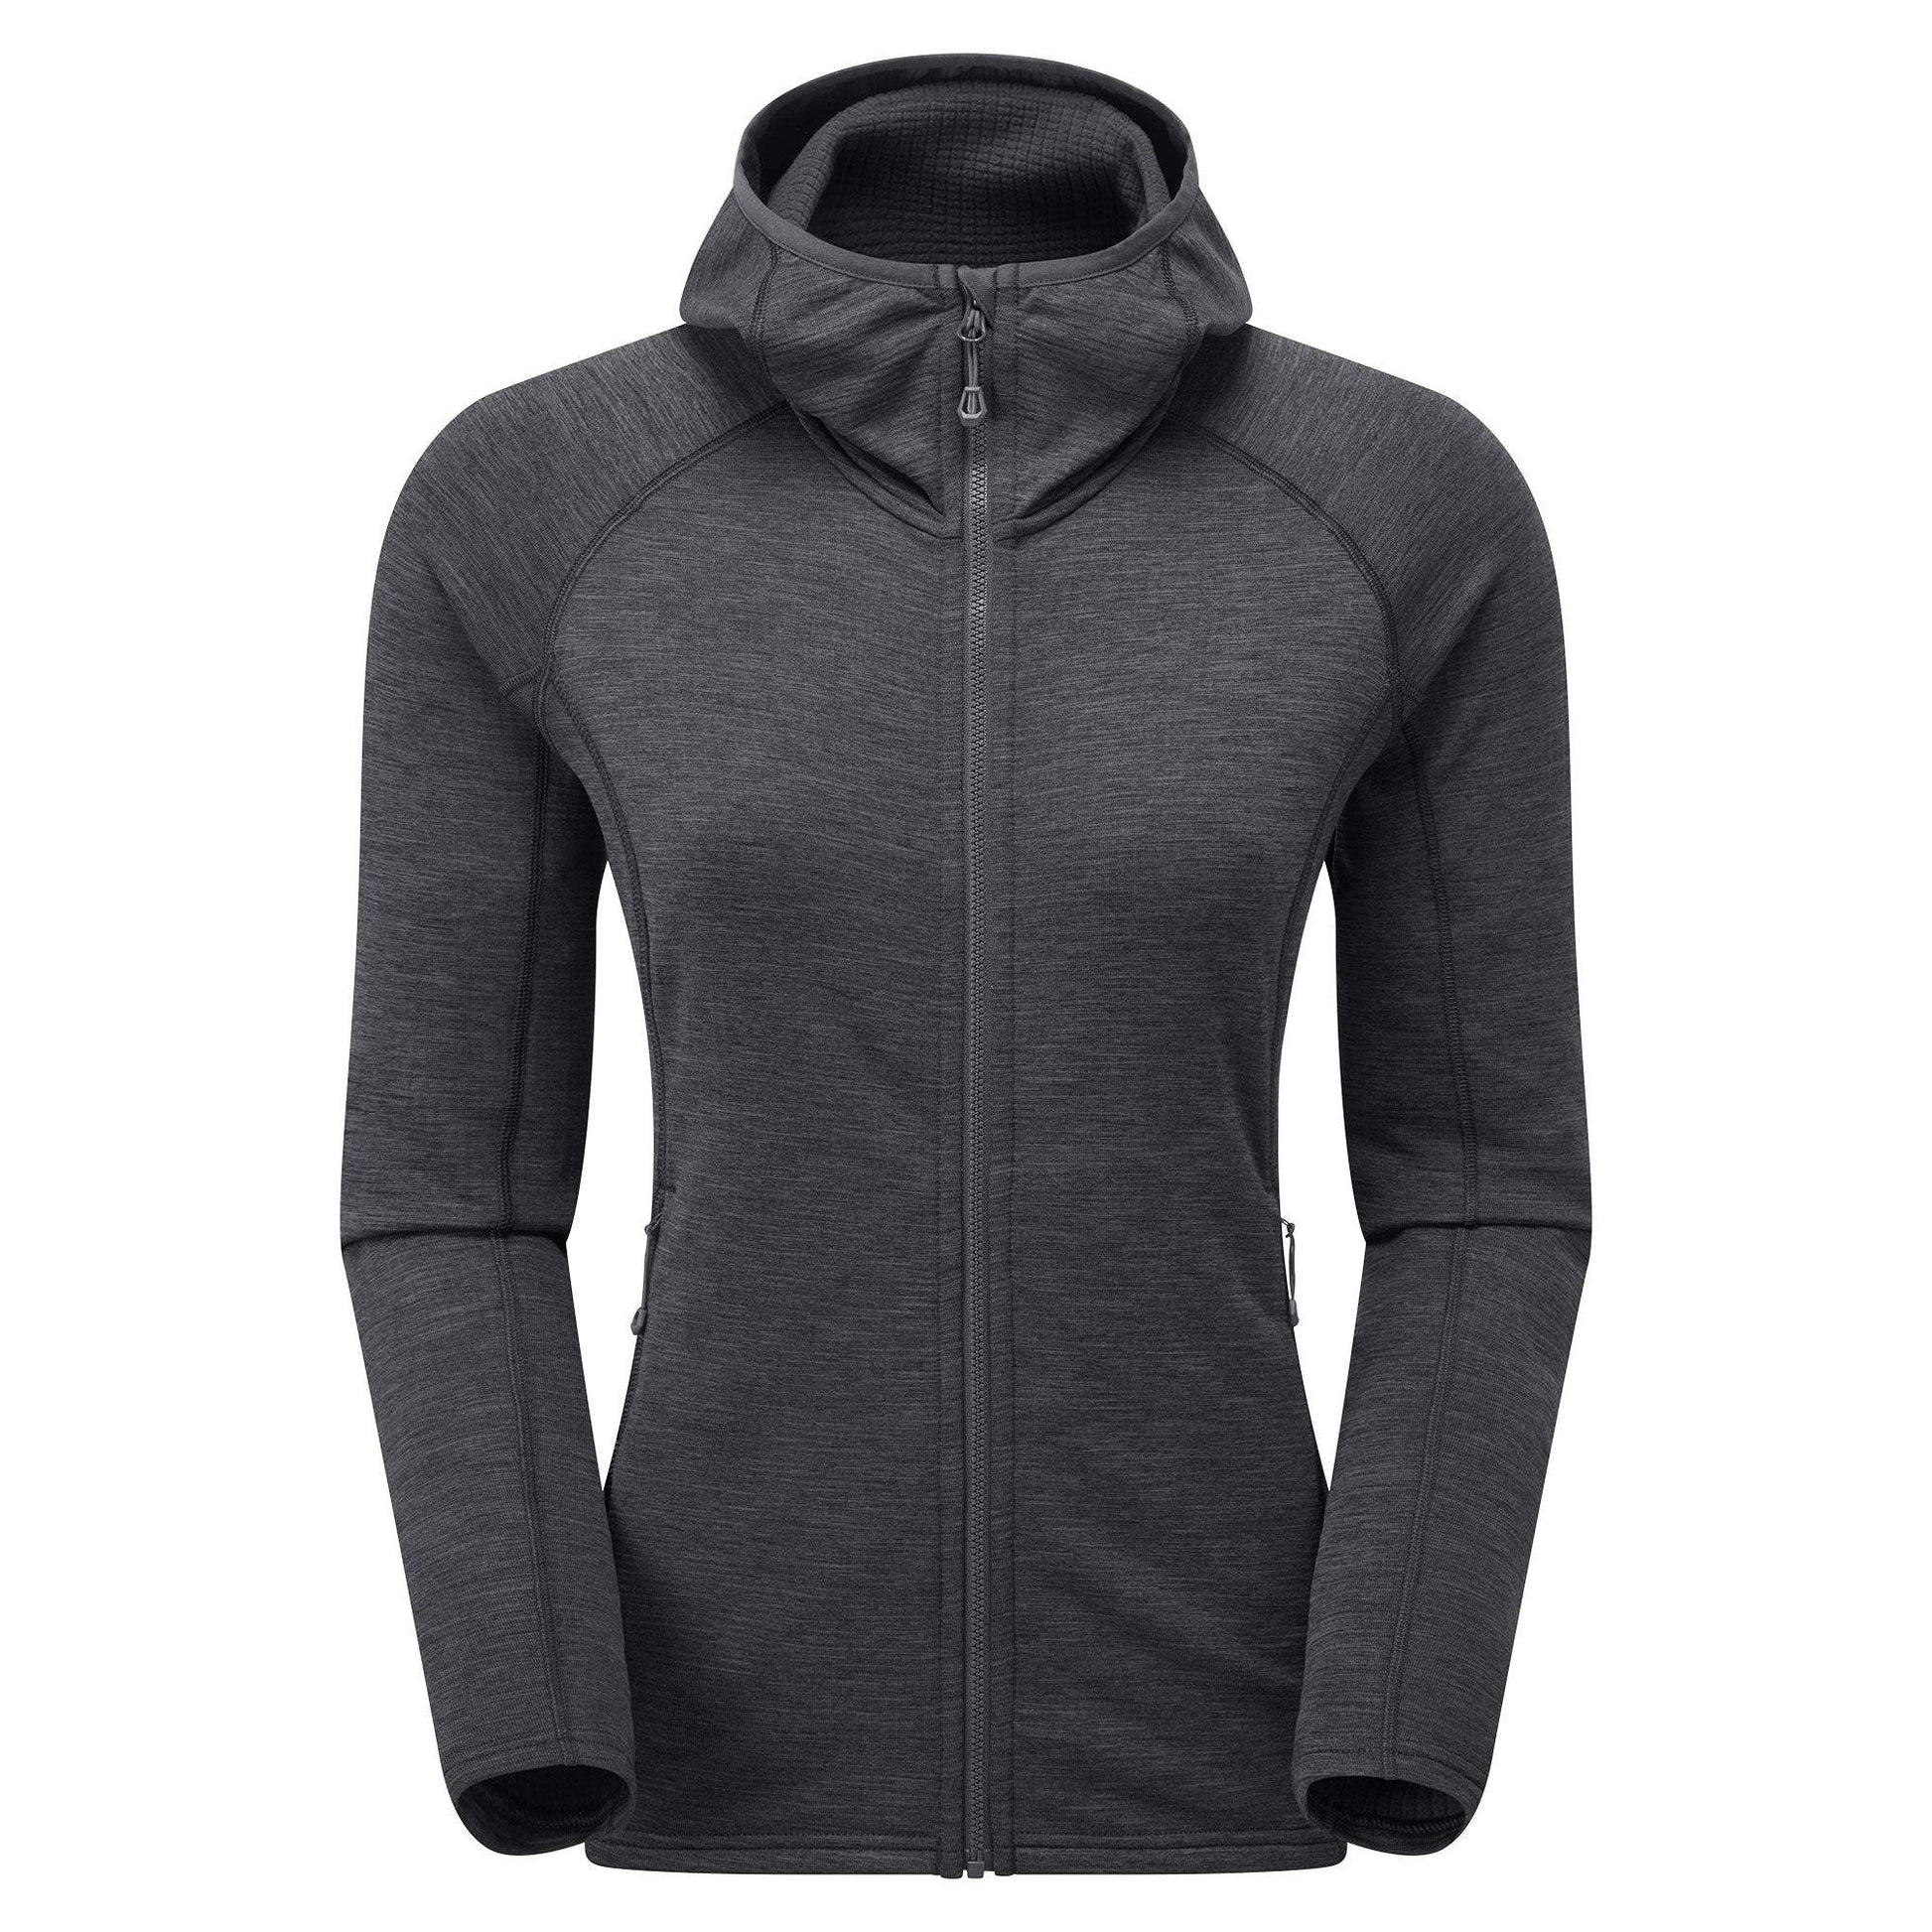 Women’s Protium Hoodie by Montane - The Luxury Promotional Gifts Company Limited